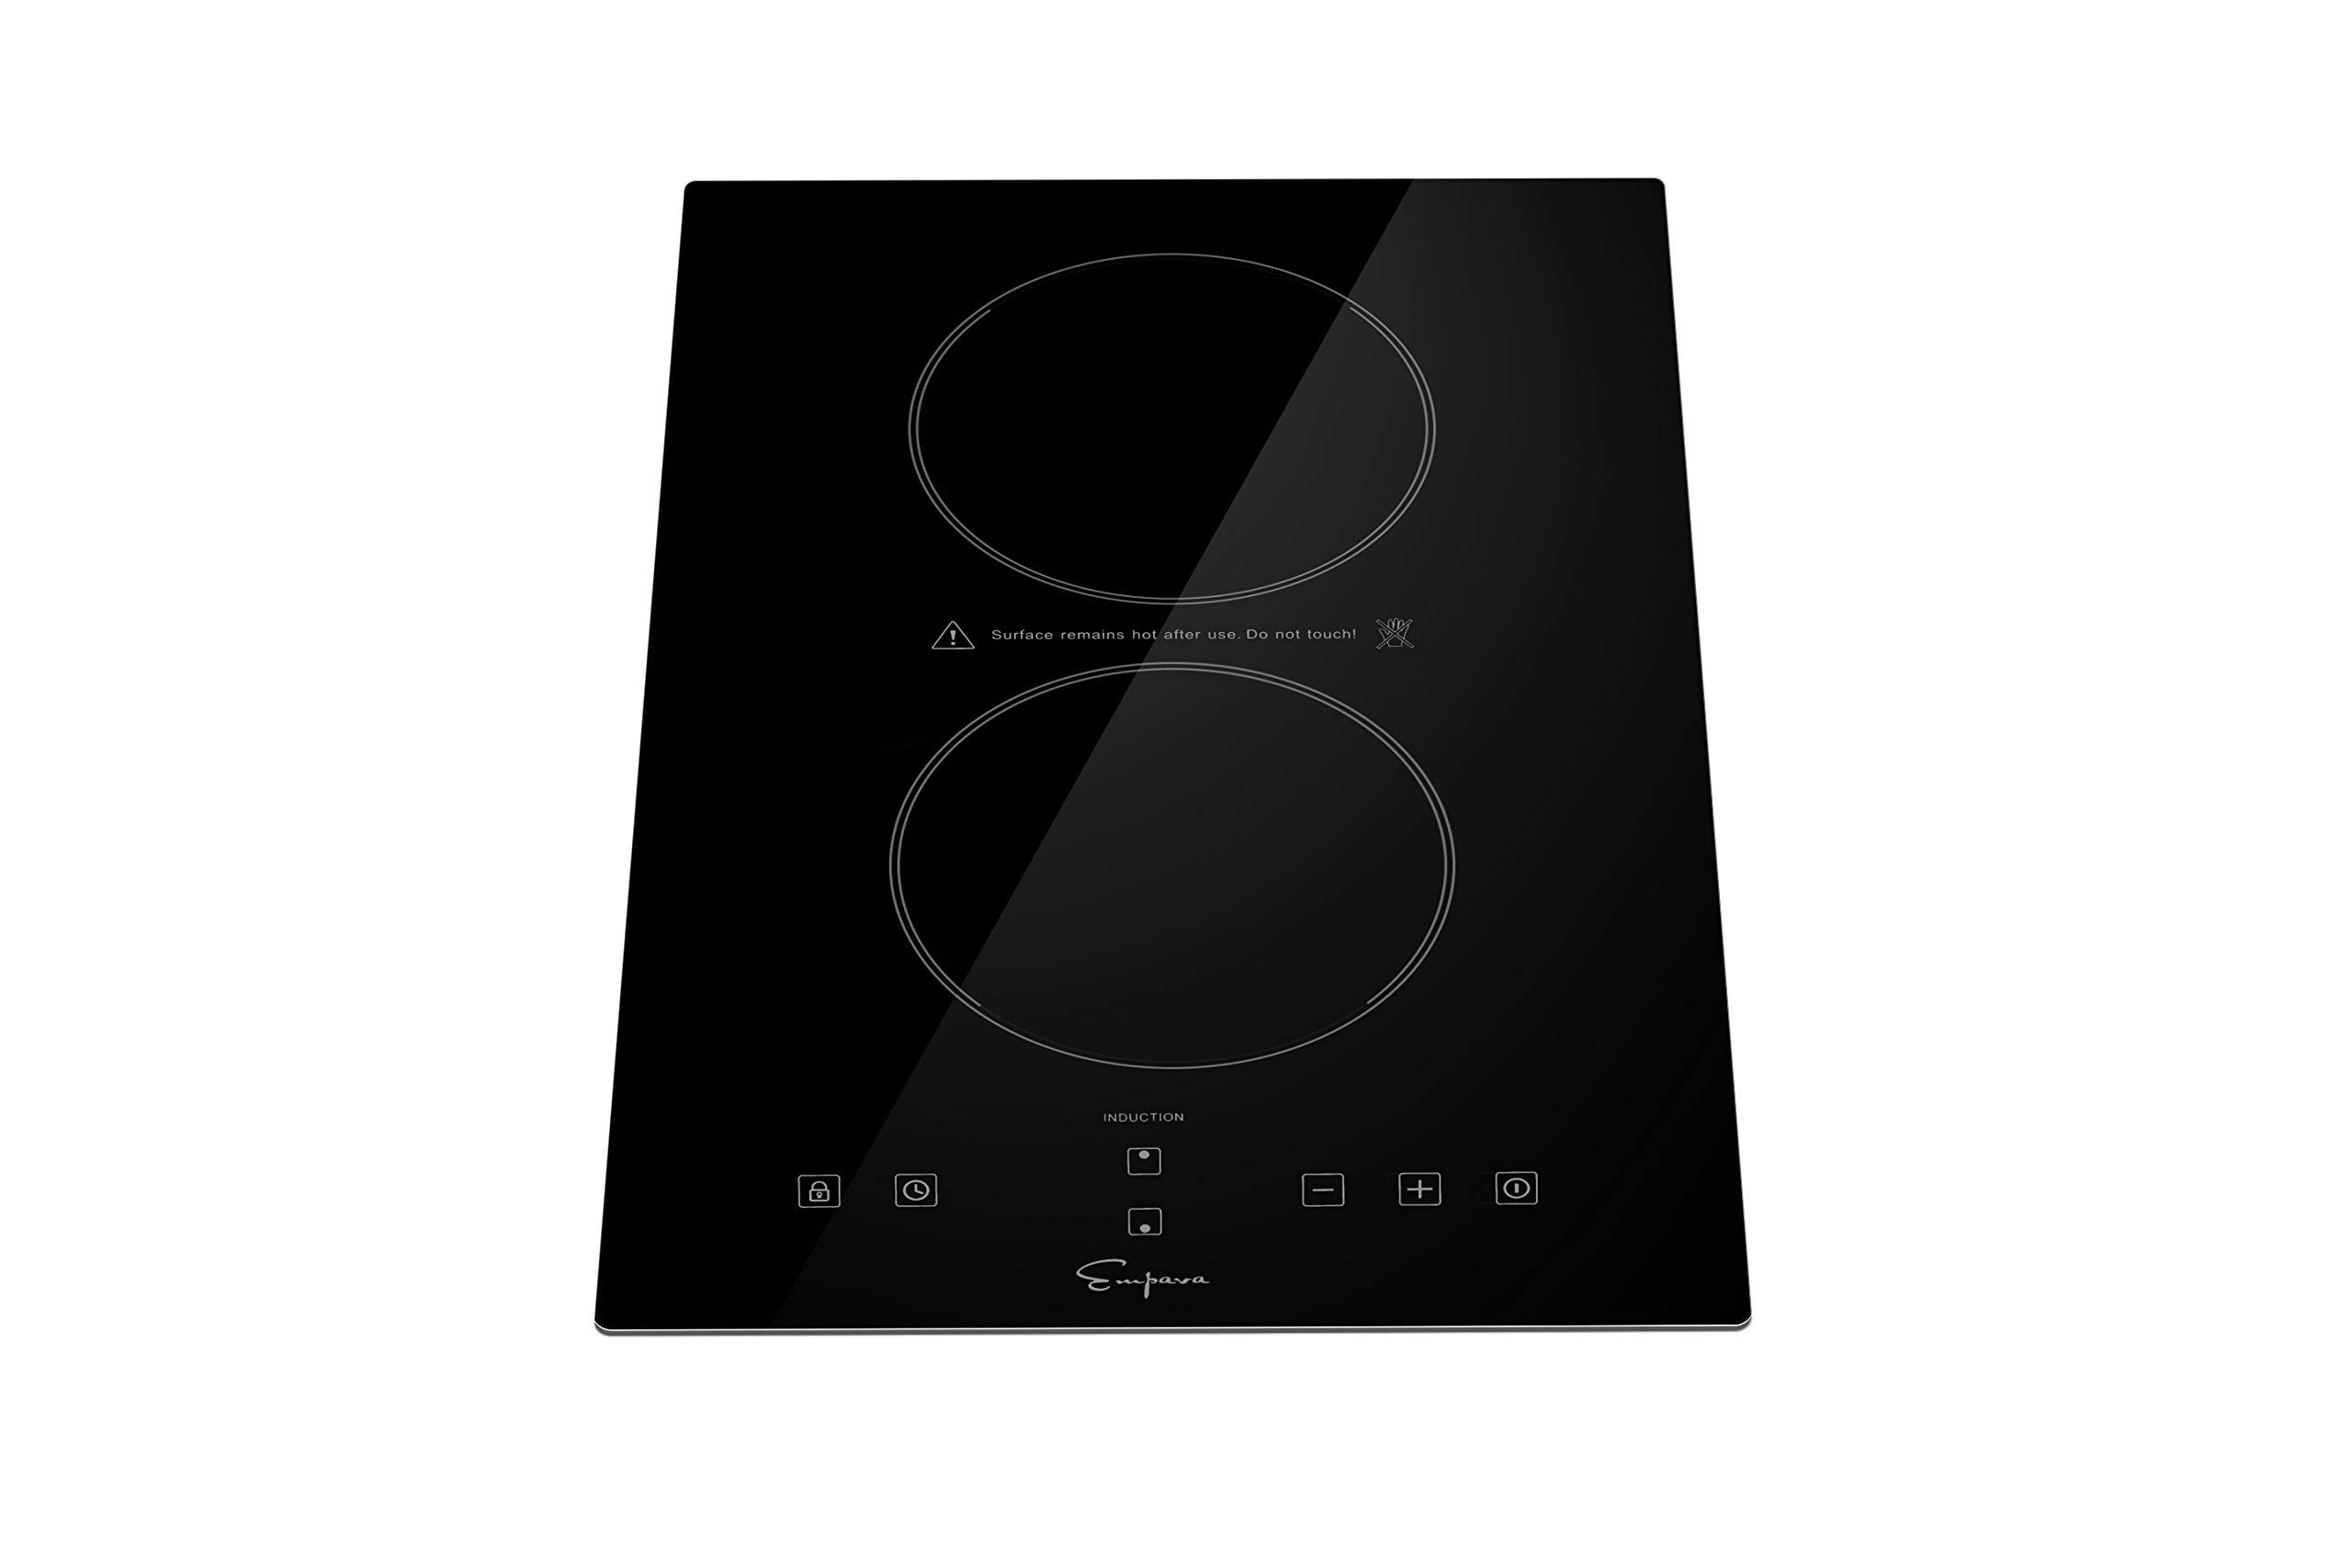 Empava 12 Inch Electric Induction Cooktop Smooth Surface with 2 Burners 120V, 12 Inch, Black